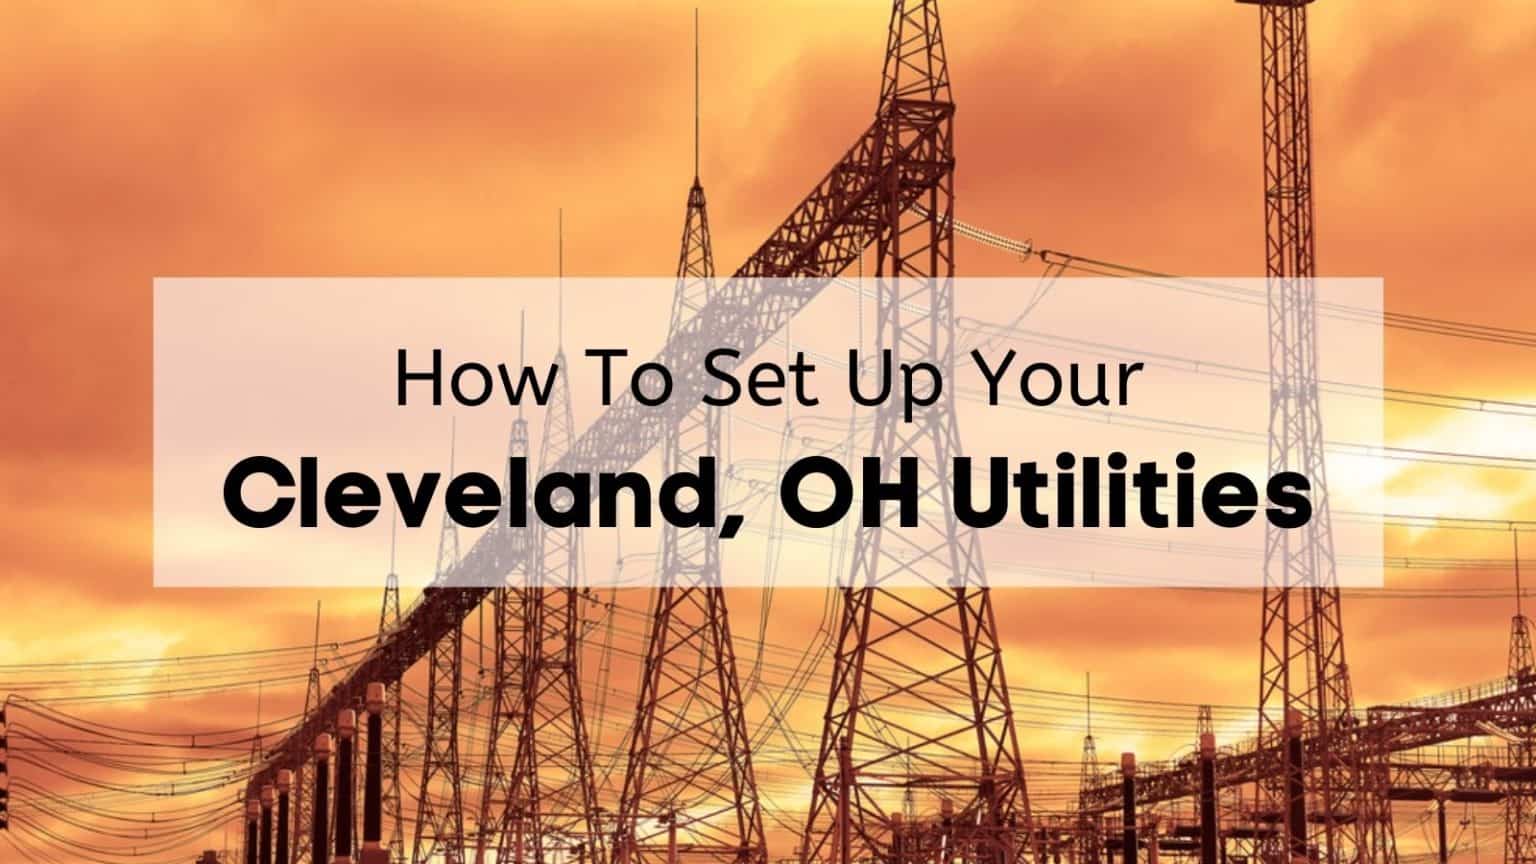 Cleveland, OH Utilities | COMPLETE guide to water, electric, trash, and